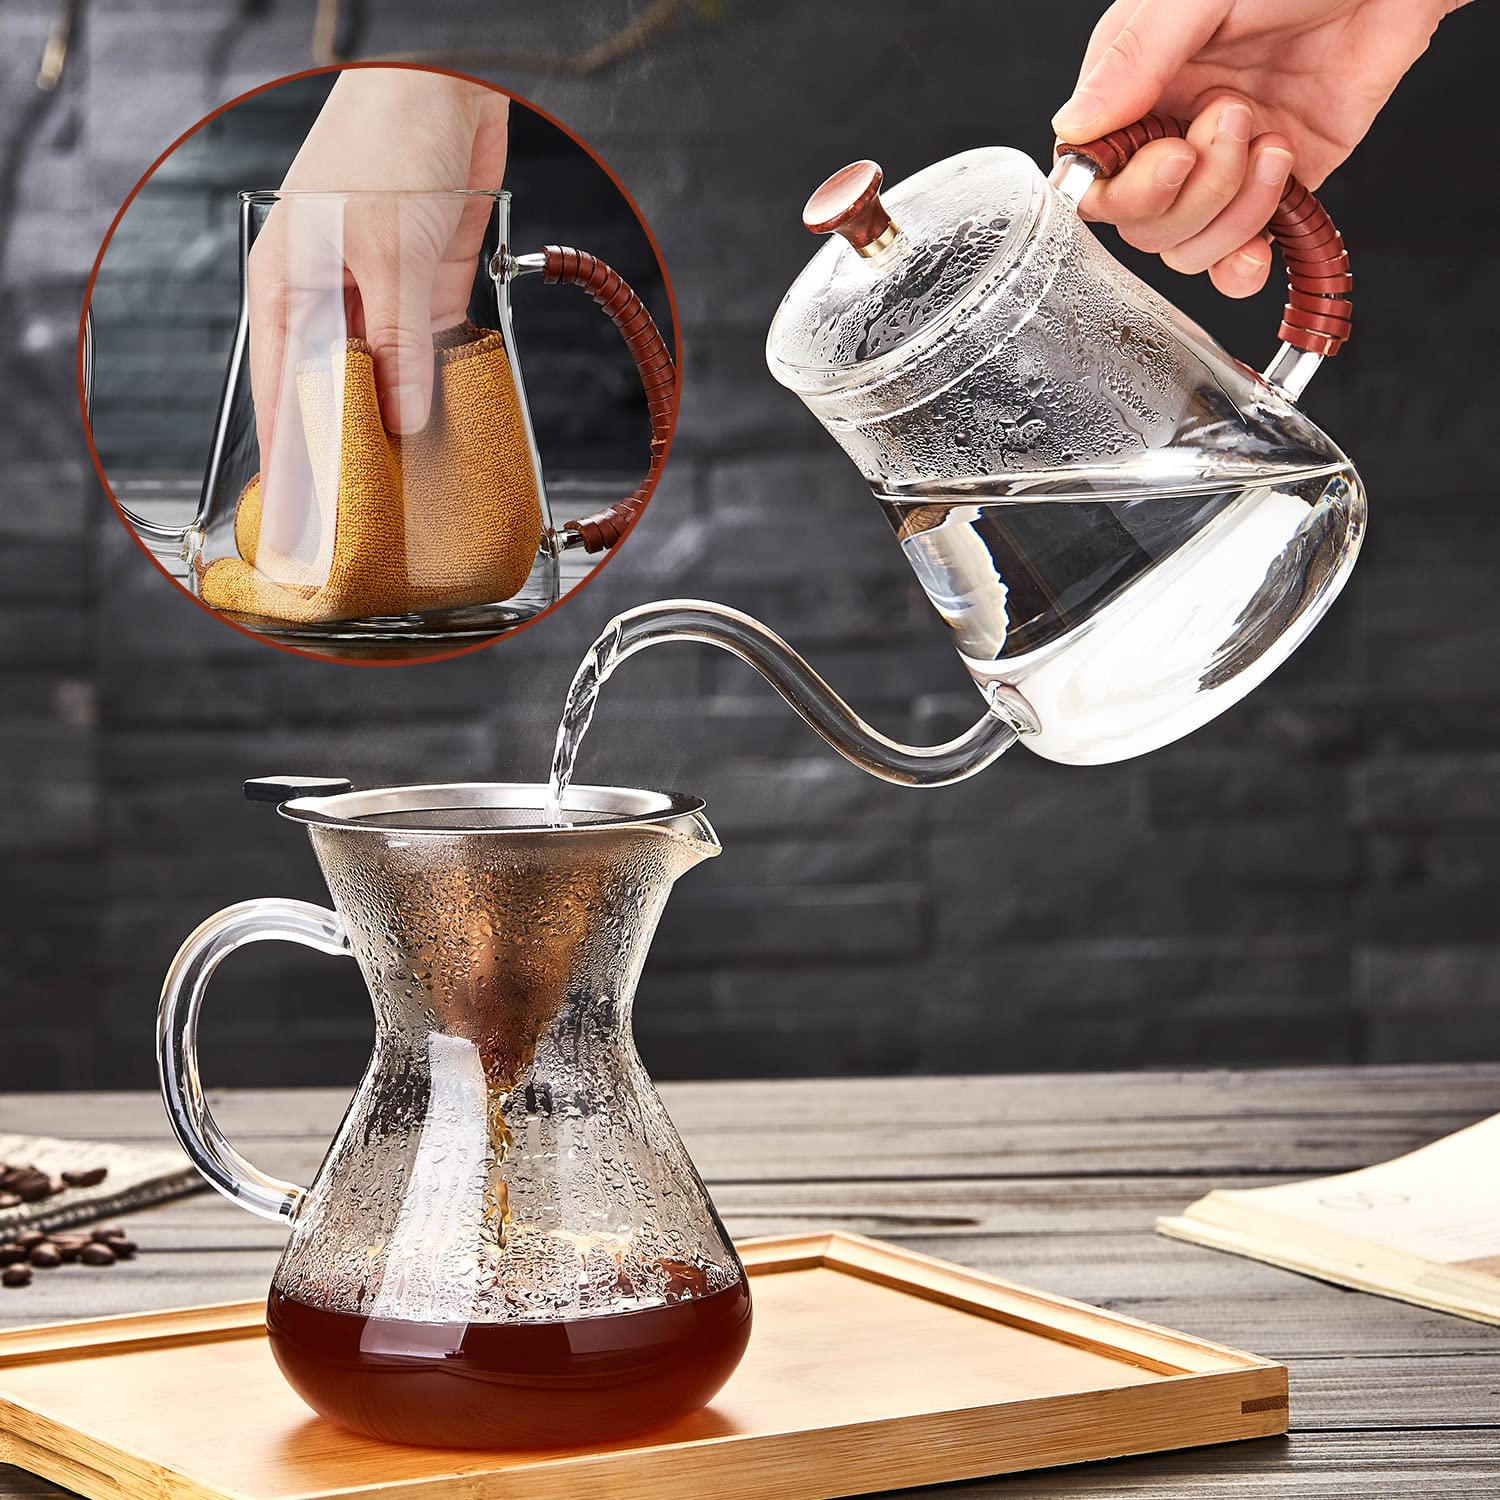 Unbreakable Gooseneck Kettle for Drip Coffee 20OZ Pour Over Coffee Kettle Tea Kettle for Stove Top,600ml/20oz Glass Coffee Kettle with Lid,Water Kettle Coffee Pot